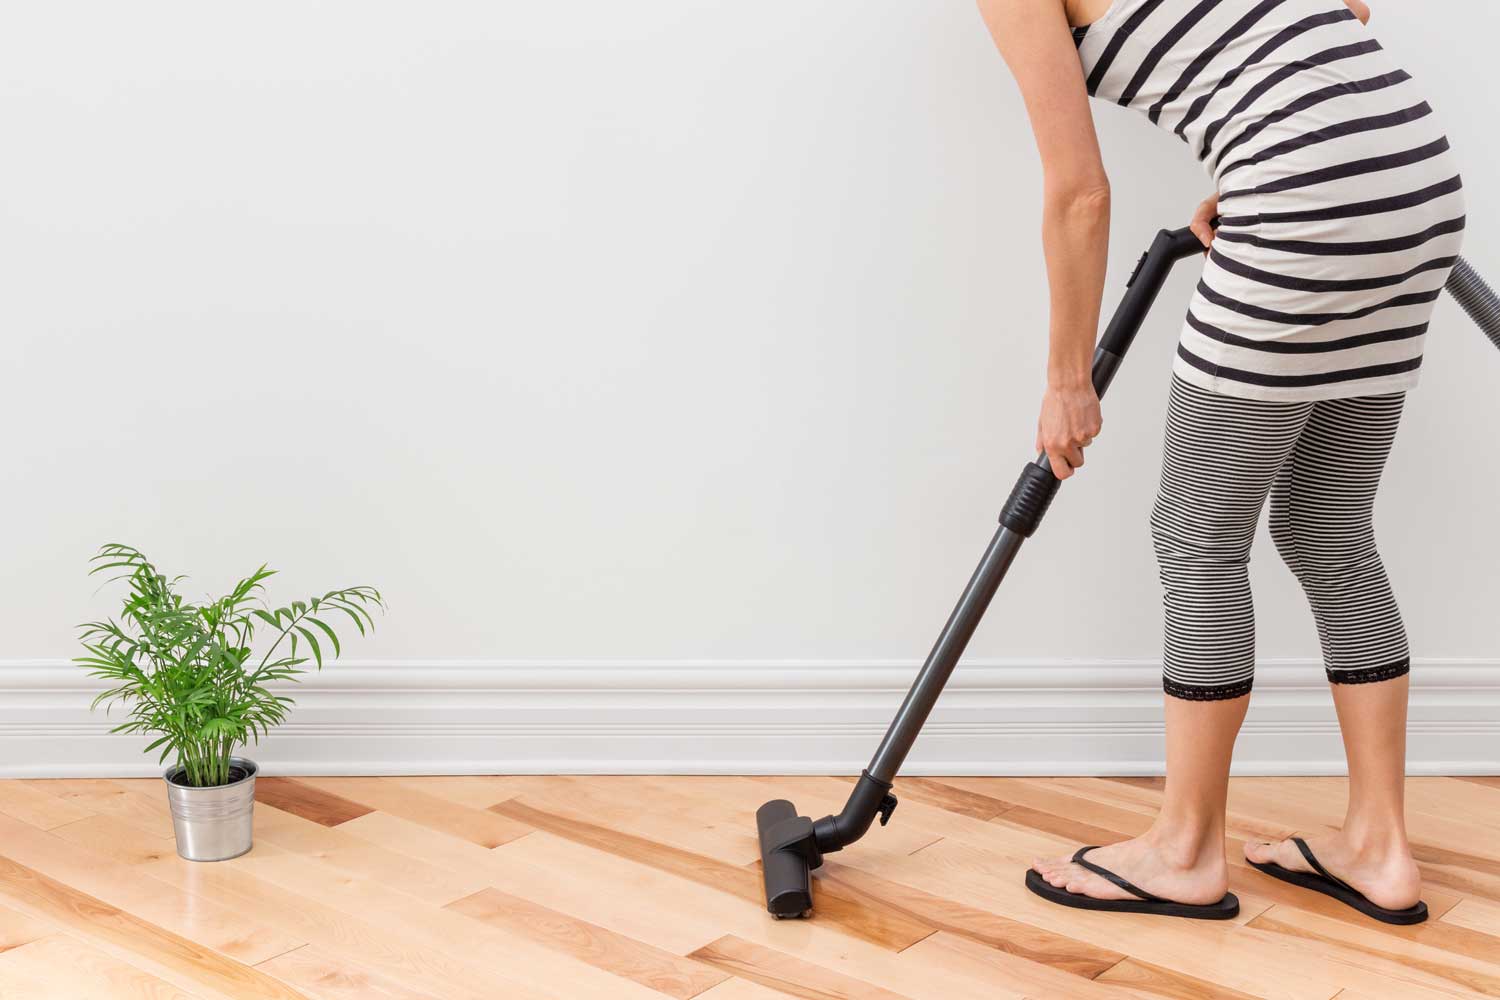 Regulary vacuum or sweep floors to remove dirt and keep your home floors looking amazing - tips from Footprints Floors in Carmel.